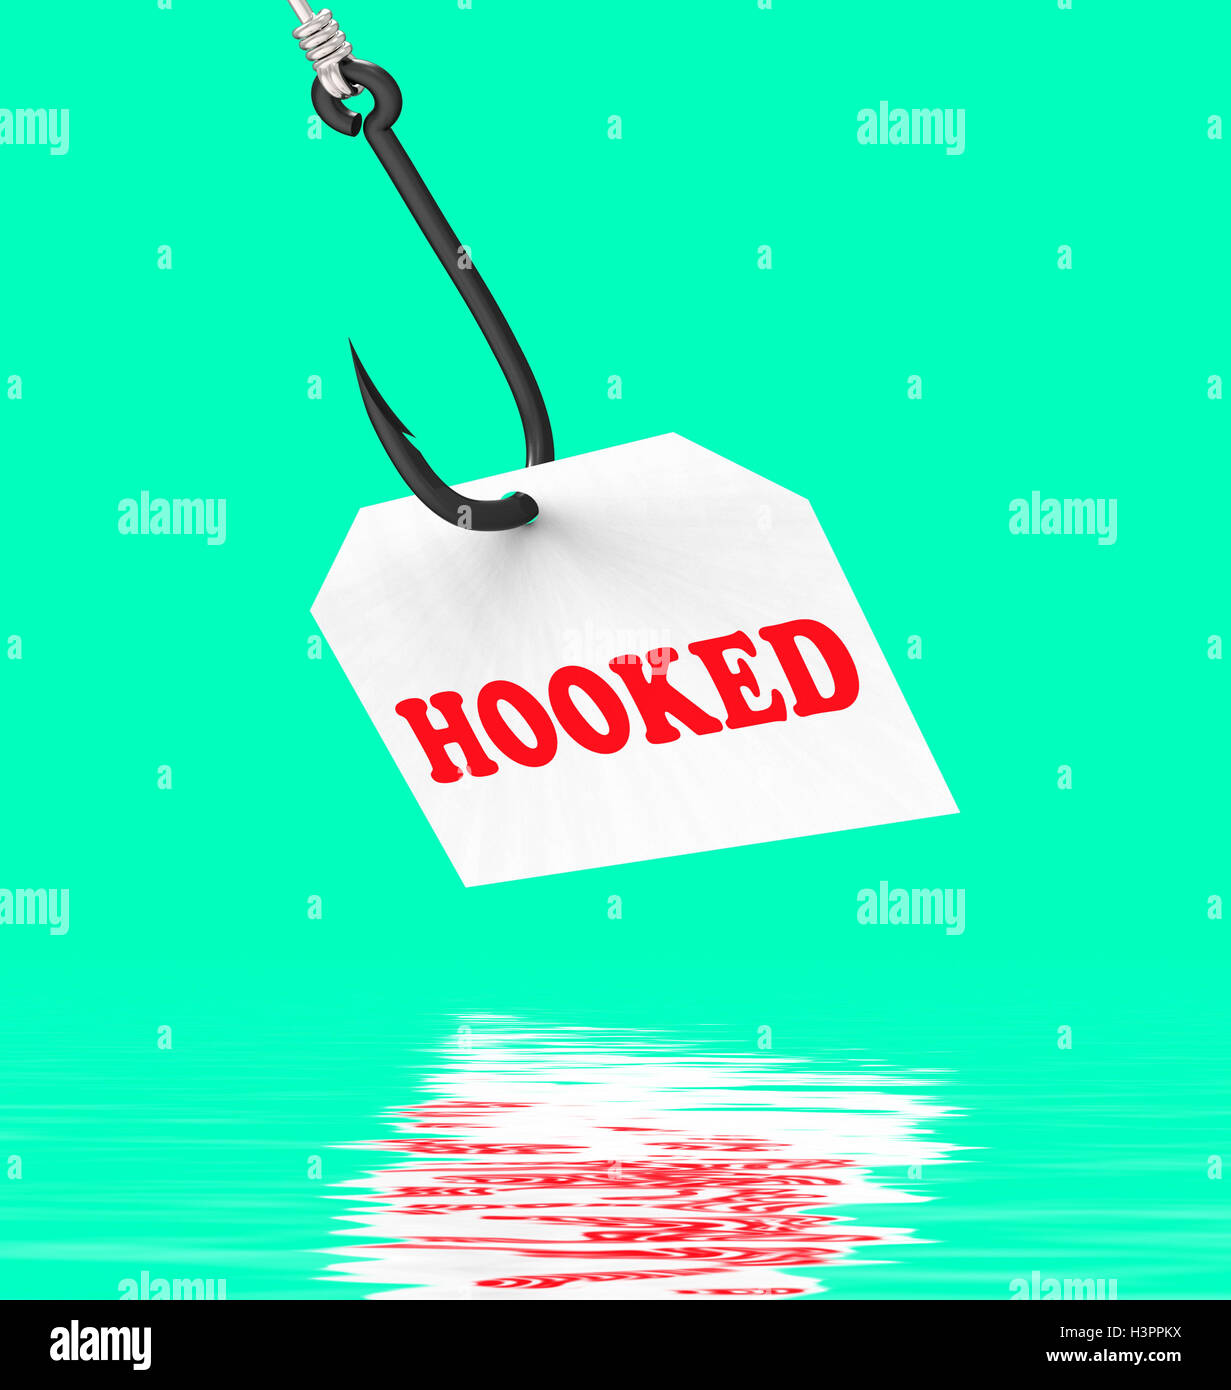 Hooked On Hook Displays Fishing Equipment Or Catch Stock Photo